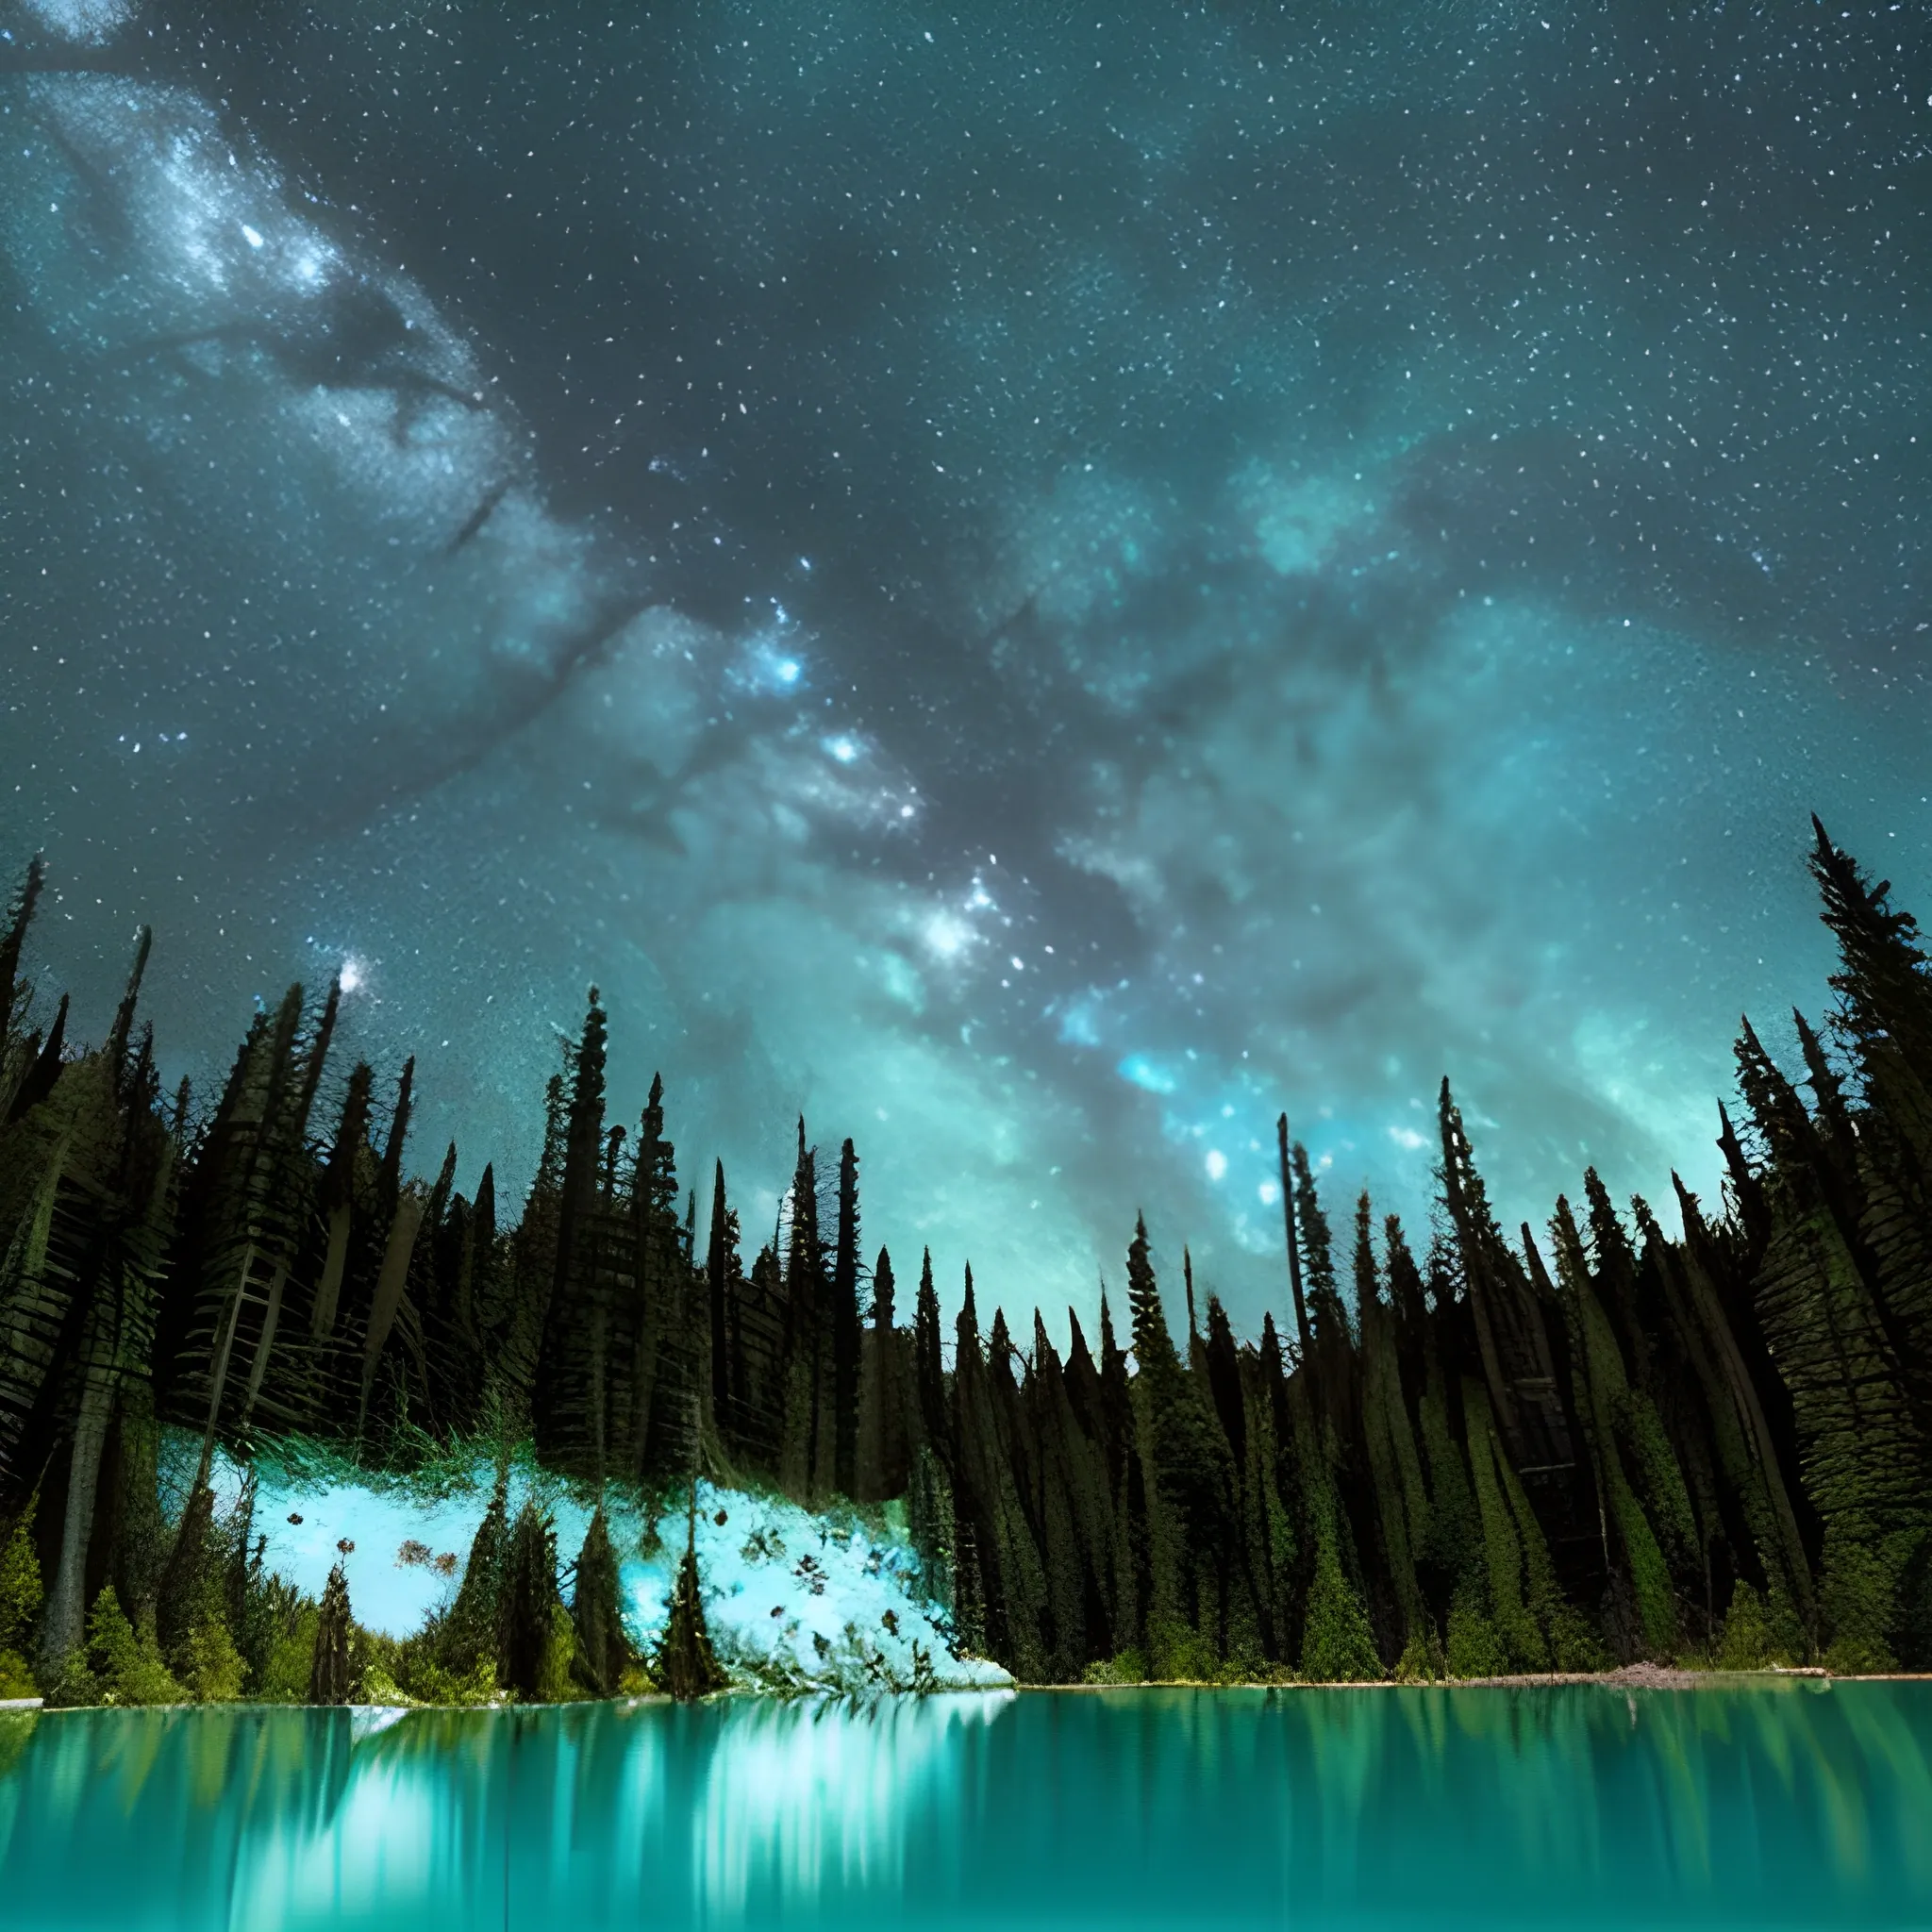 turquoise lake surrounded by trees covered with millennial moss starry sky with galaxies and spaceships crossing space in the background,